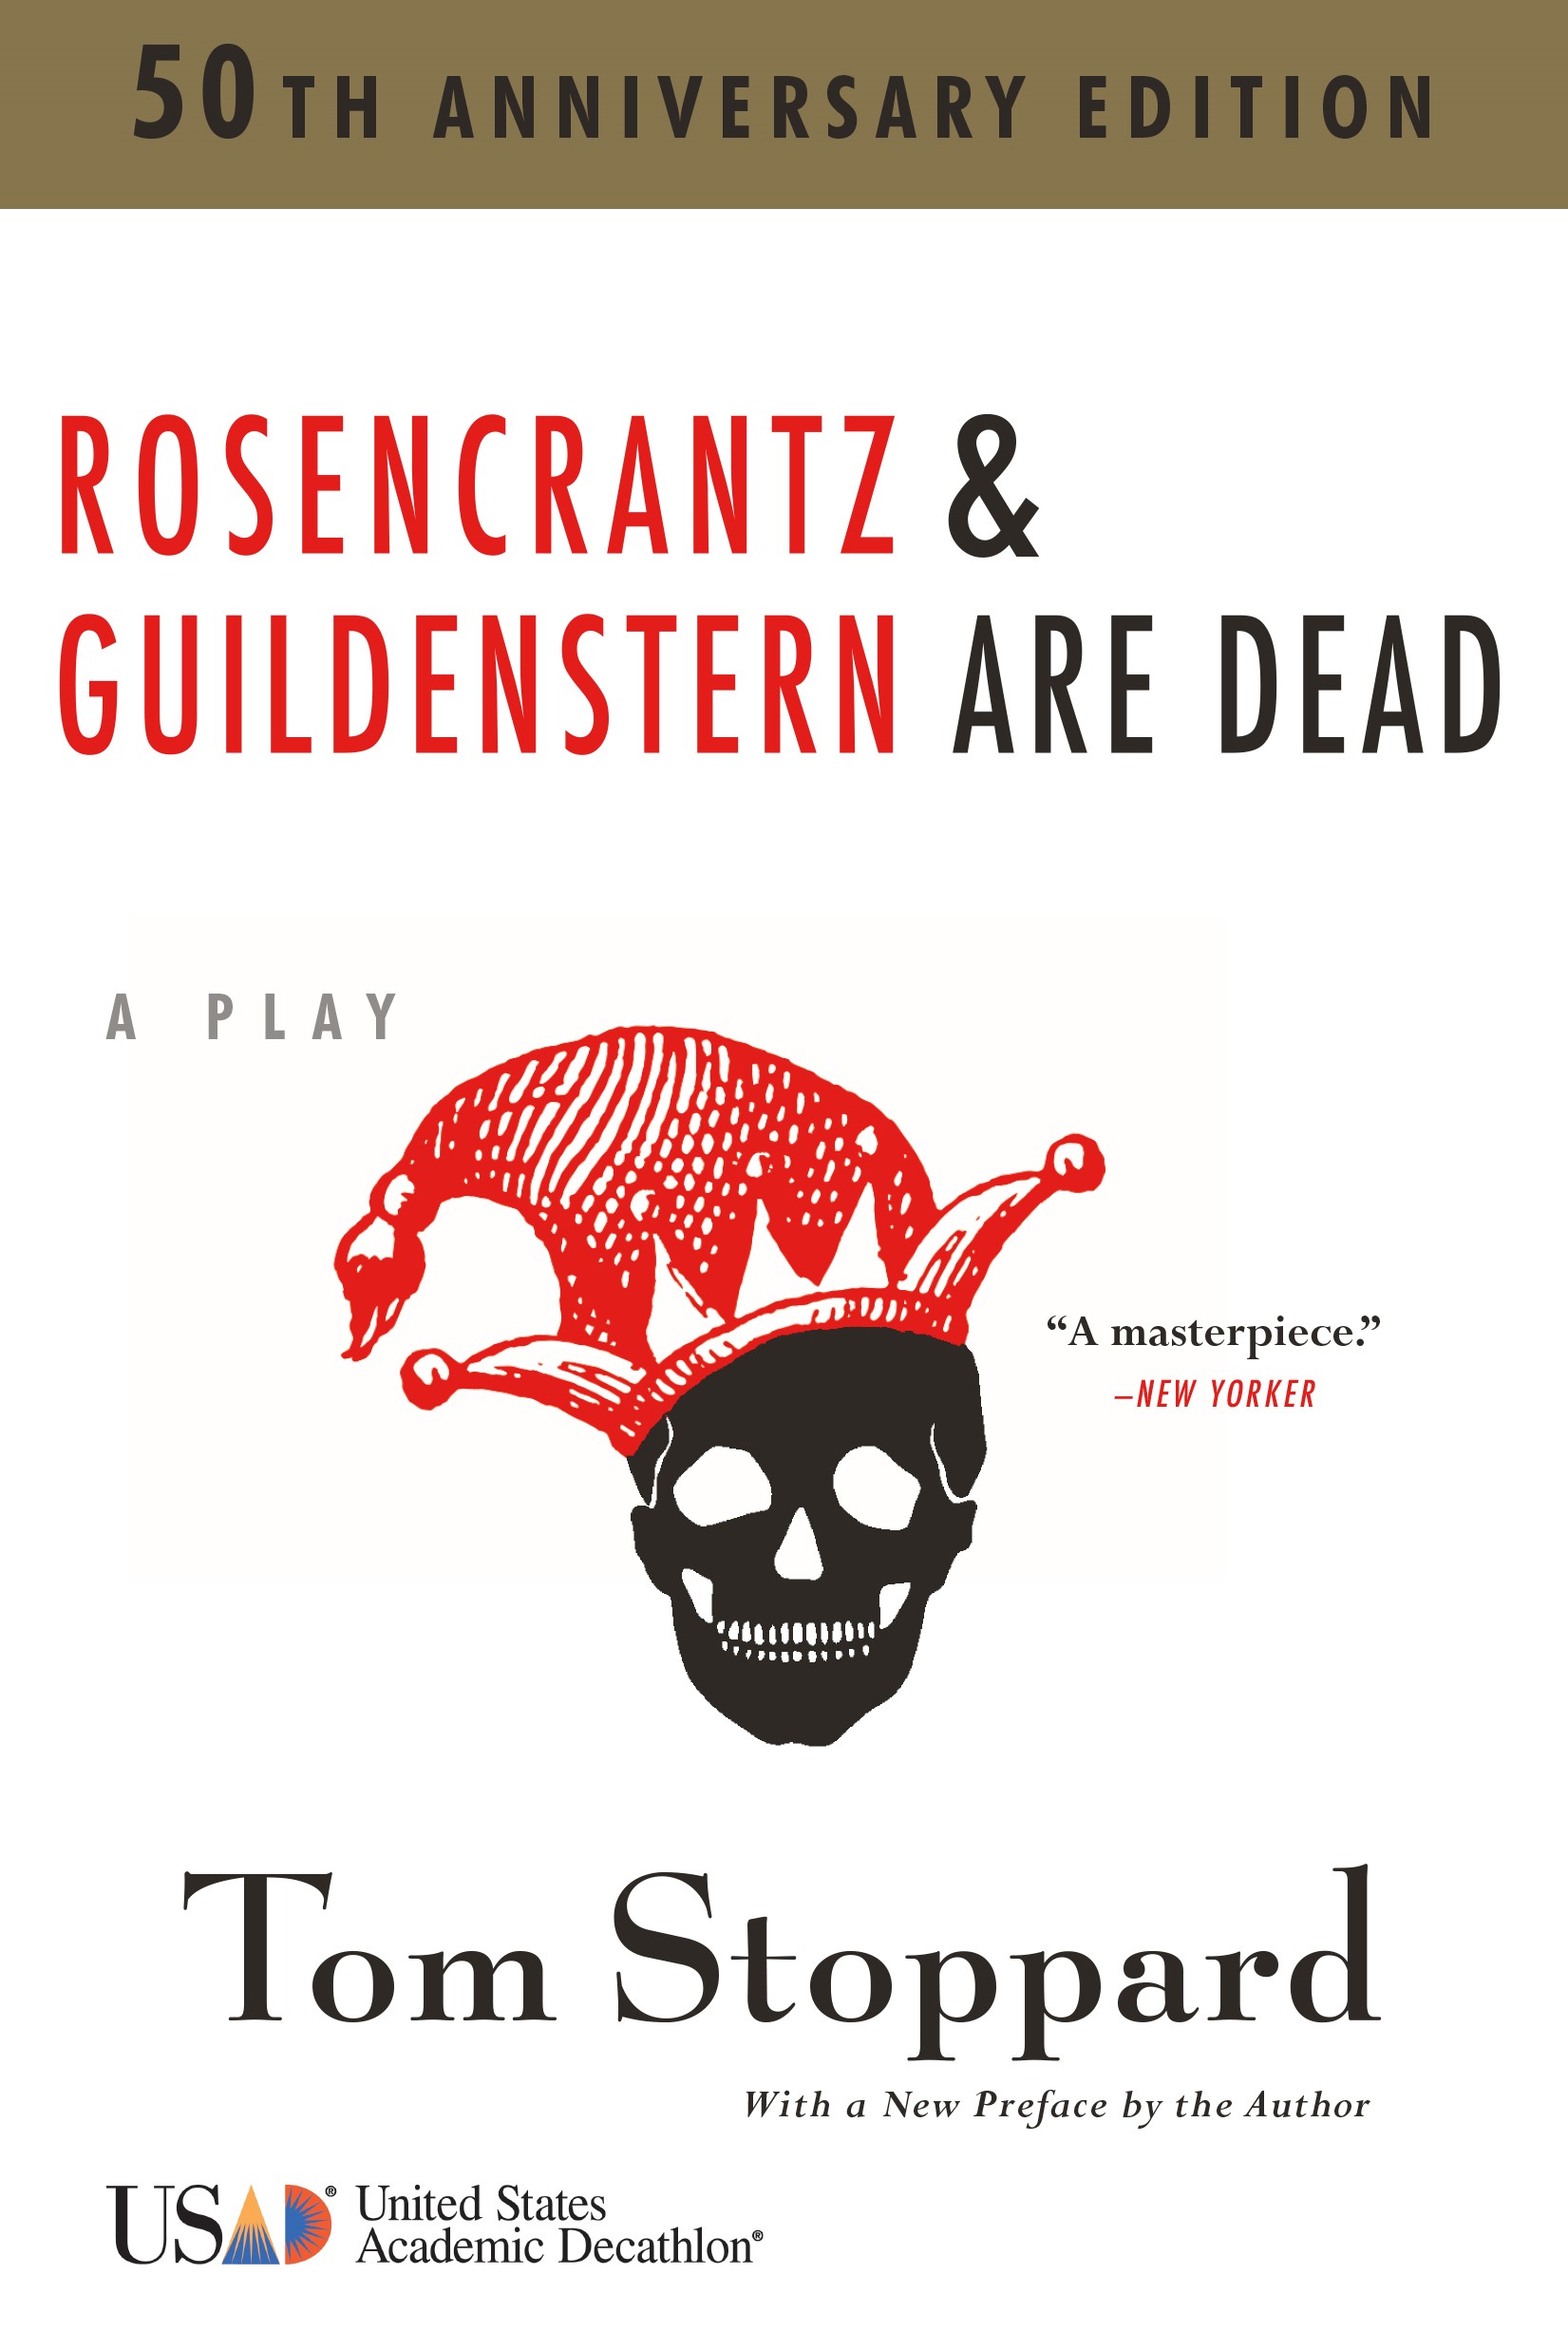 in what country do rosencrantz and guildenstern die